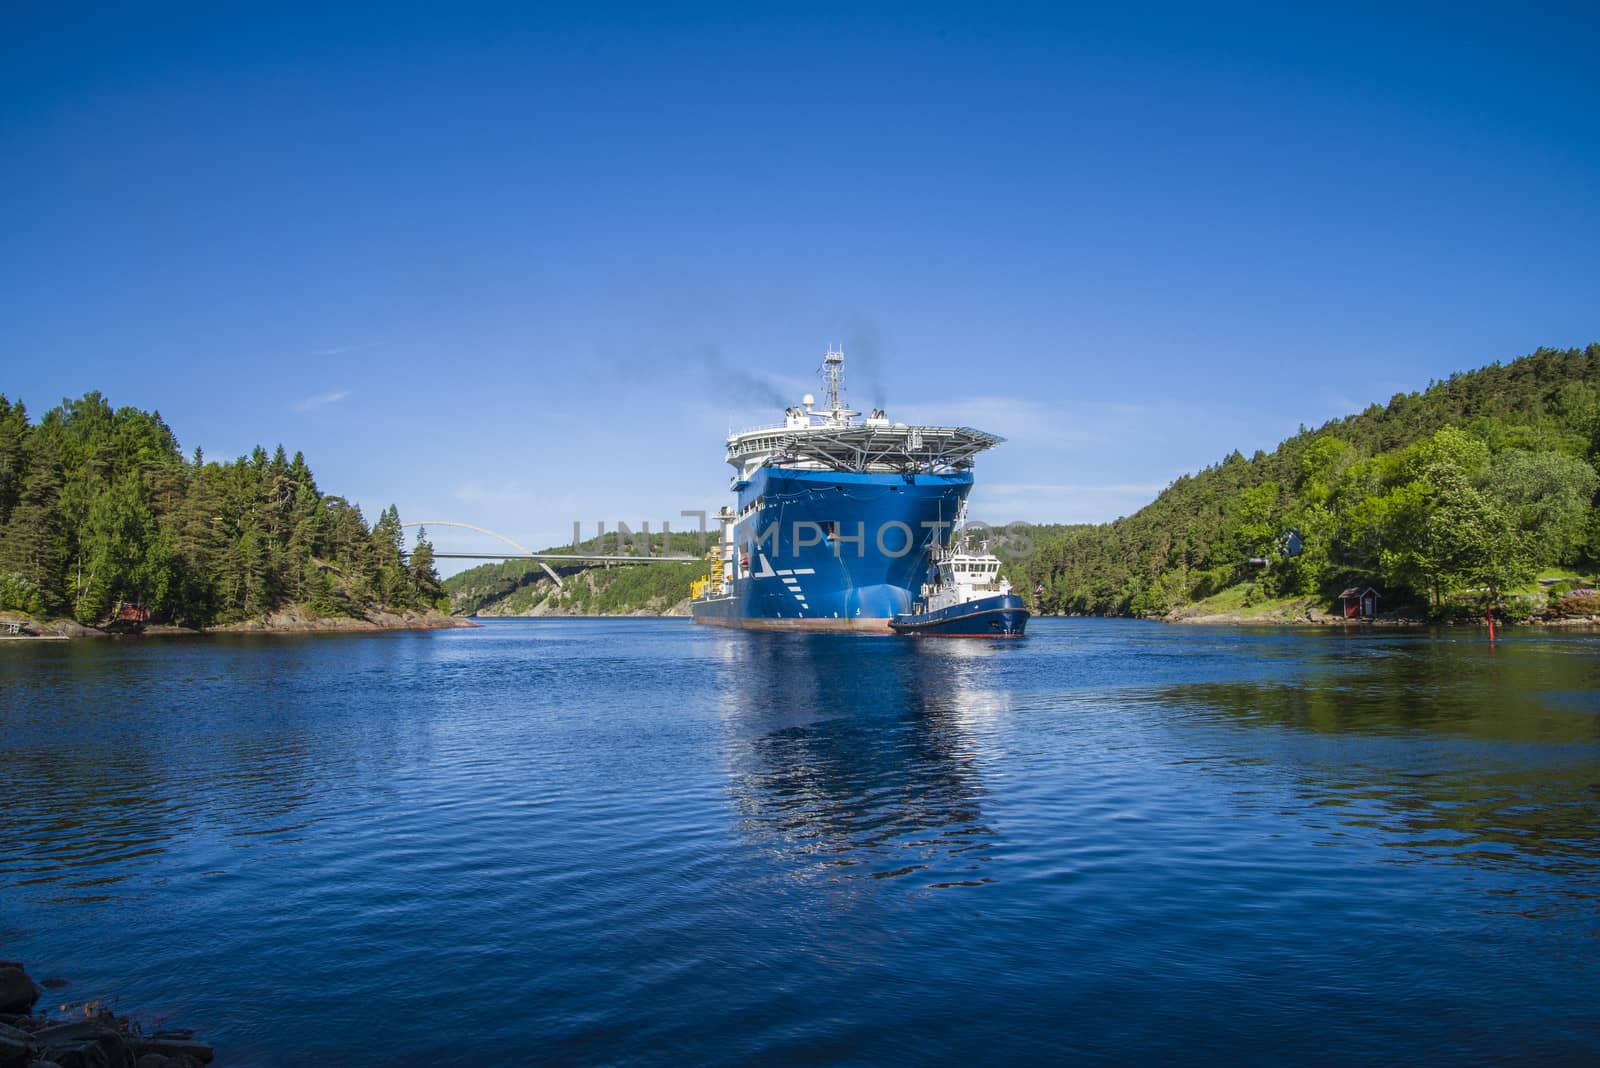 Tug Achilles and tug Belos have started towing the MV North Sea Giant through Ringdalsfjord in Halden, Norway.